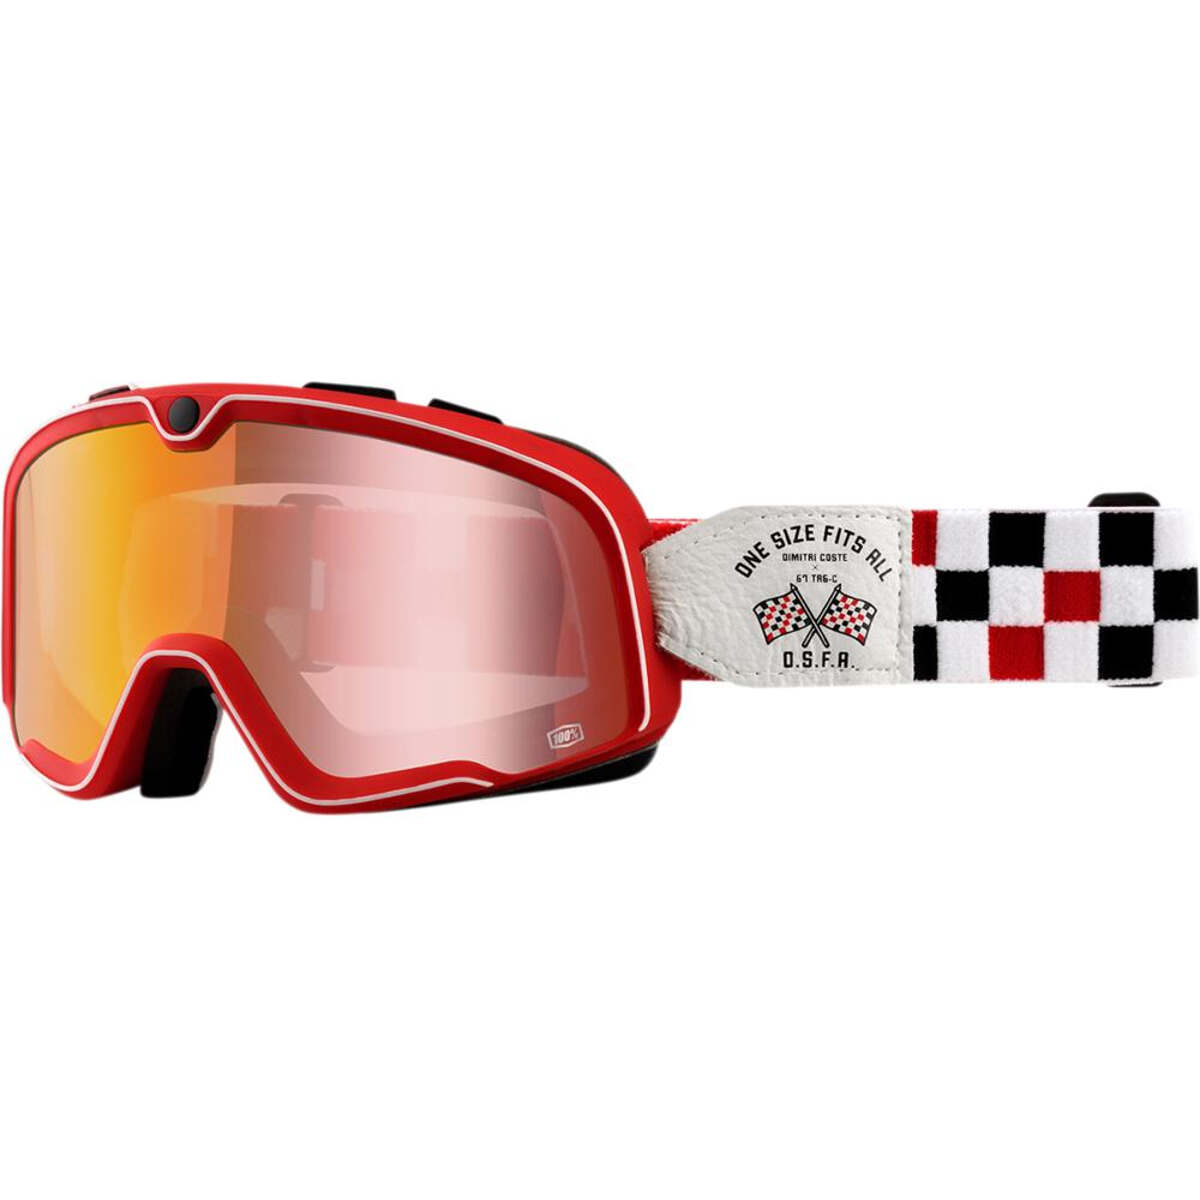 100% Crossbrille The Barstow O.S.F.A. - Rot verspiegelt Anti-Fog